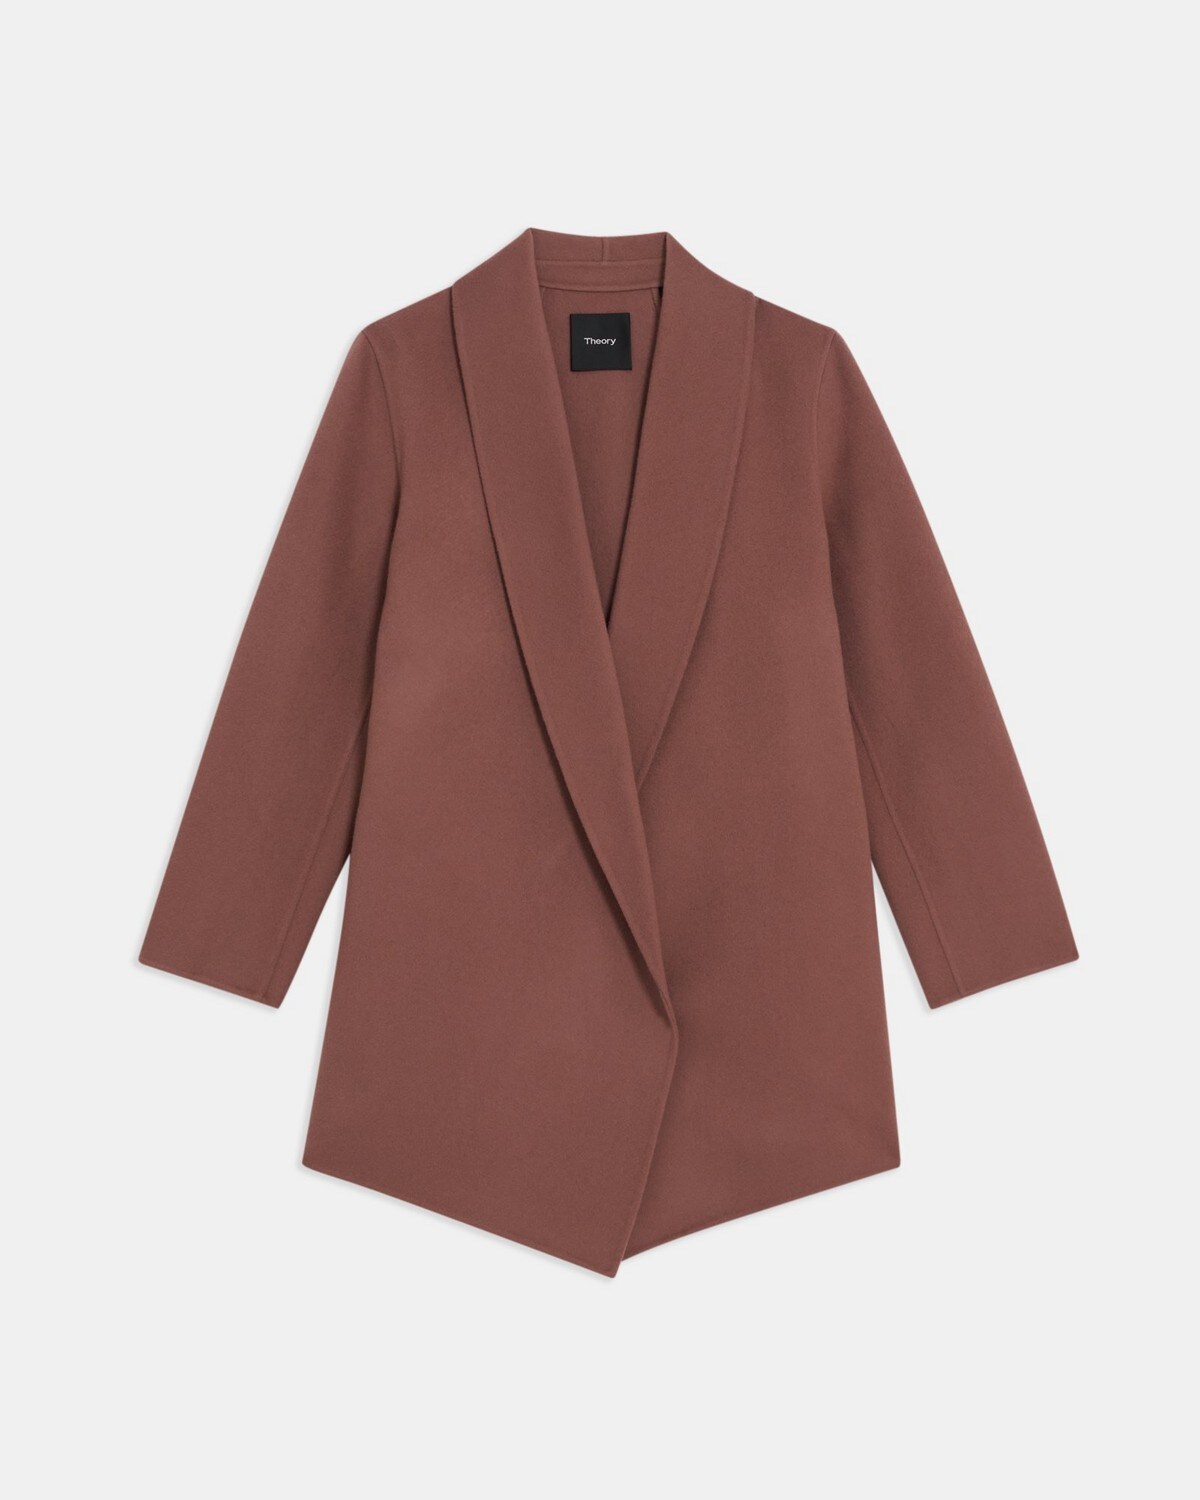 Shawl Collar Clairene Jacket in Double-Face Wool-Cashmere